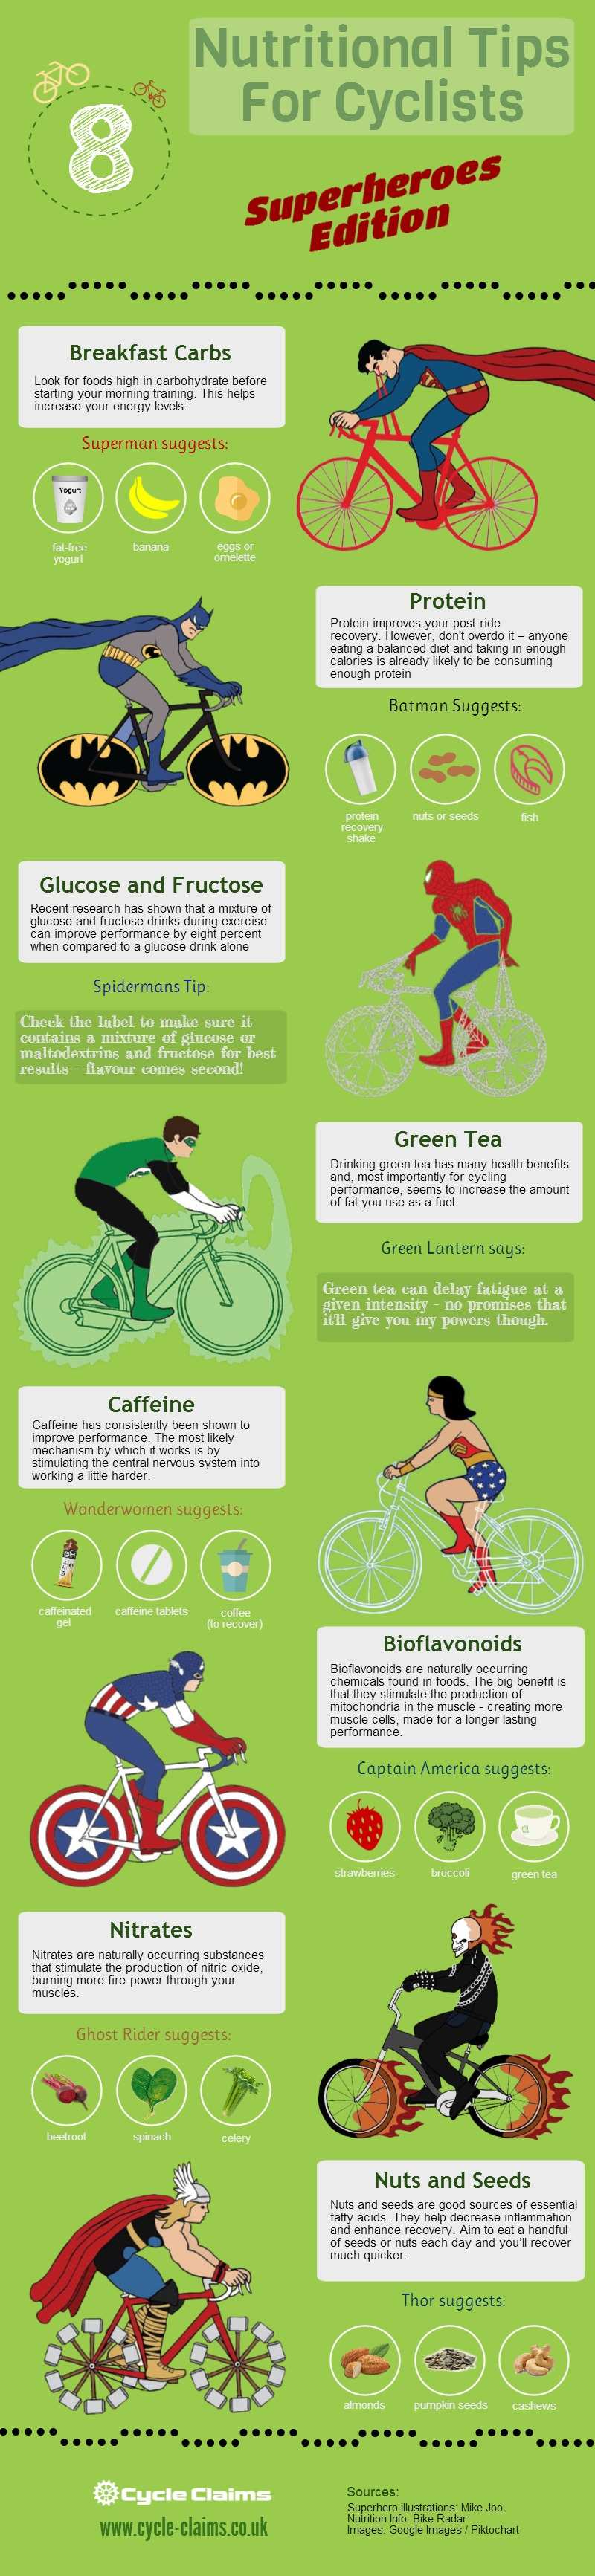 8 Nutritional Tips For Cyclists #infographic